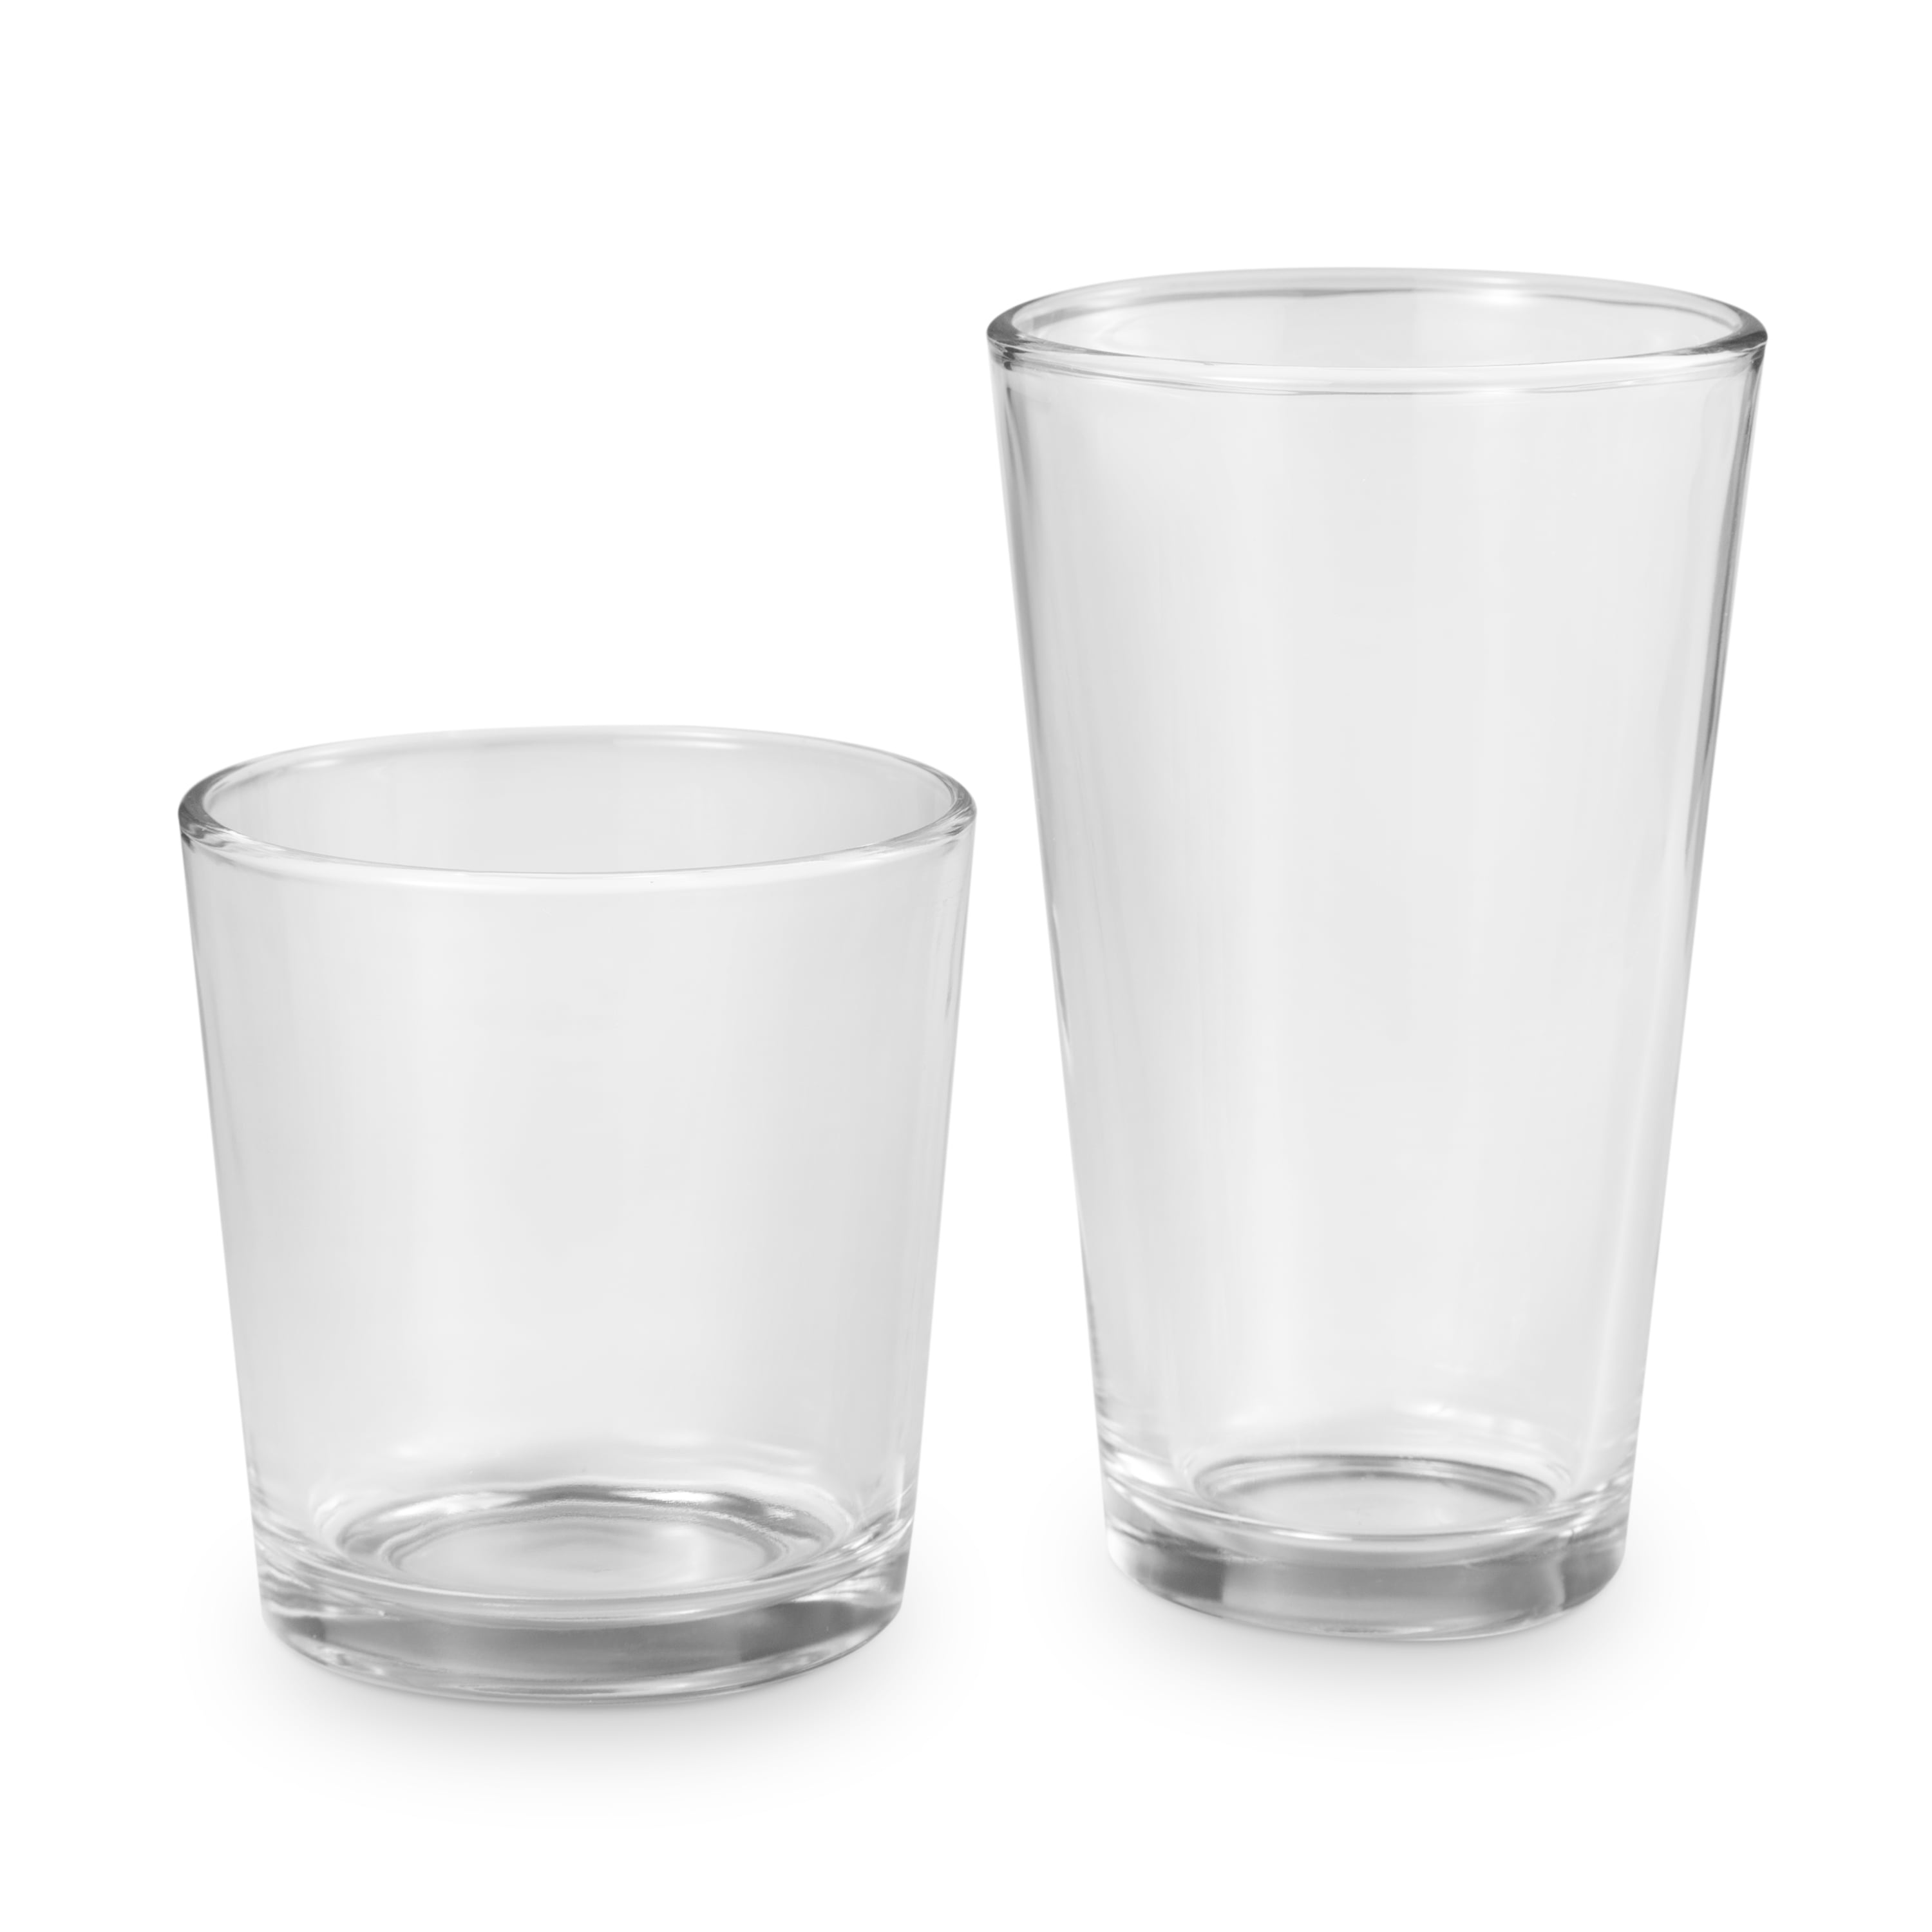 Pleneal Drinking Glasses Set Acrylic Glassware for Mixed Drinks